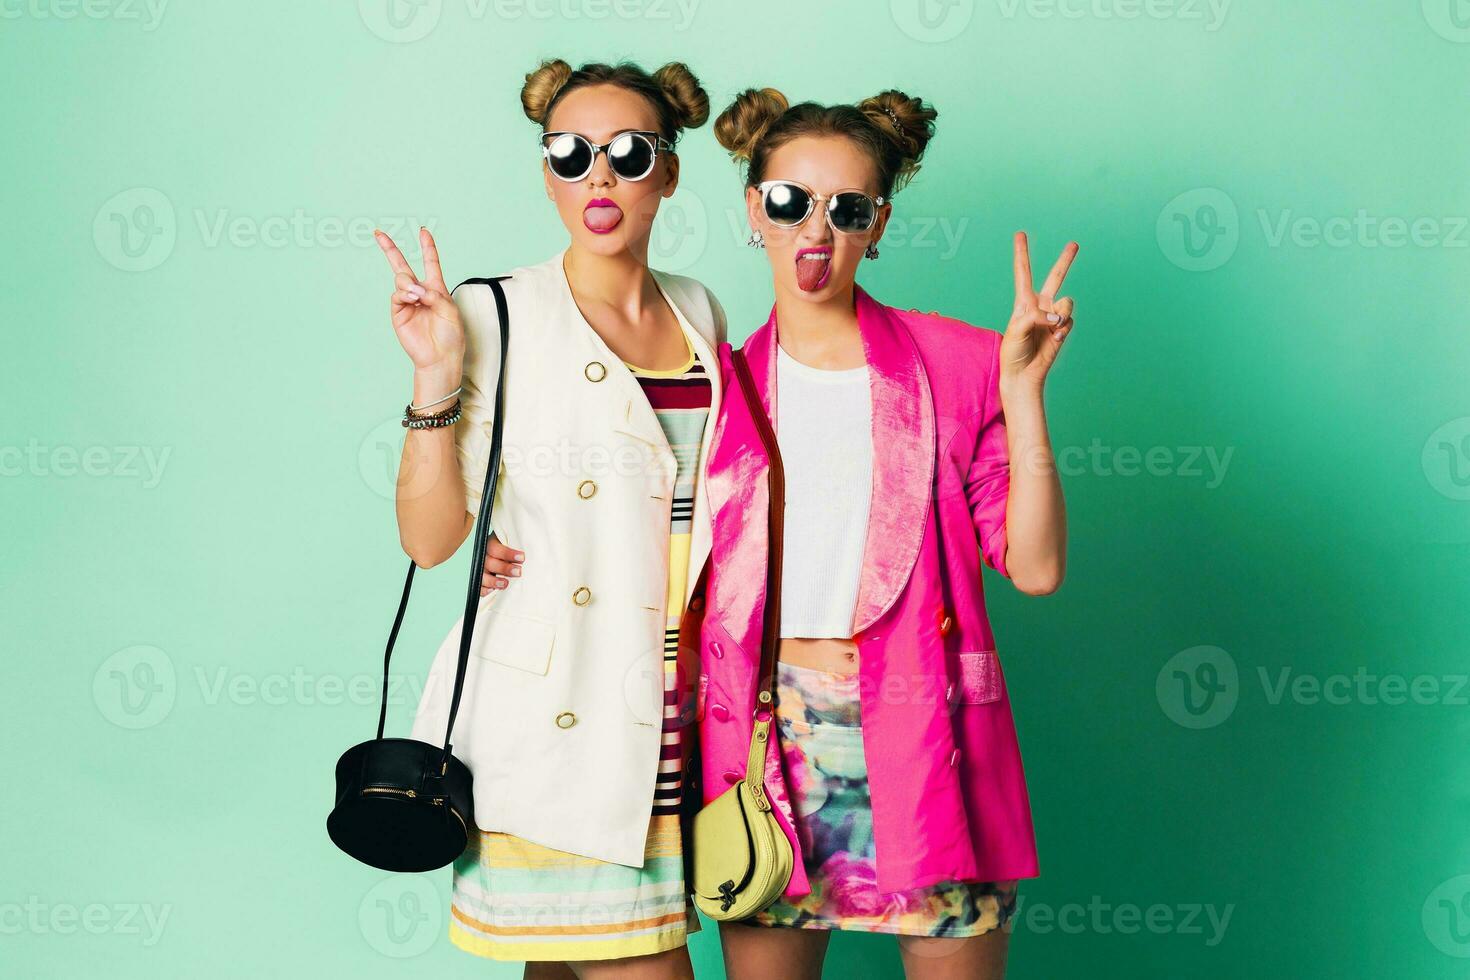 Fashion studio image of two young women in stylish casual  spring outfit   having fun, show  tongue. Bright trendy   colors, stylish hairstyle  with buns , cool sunglasses. Friends portrait. photo